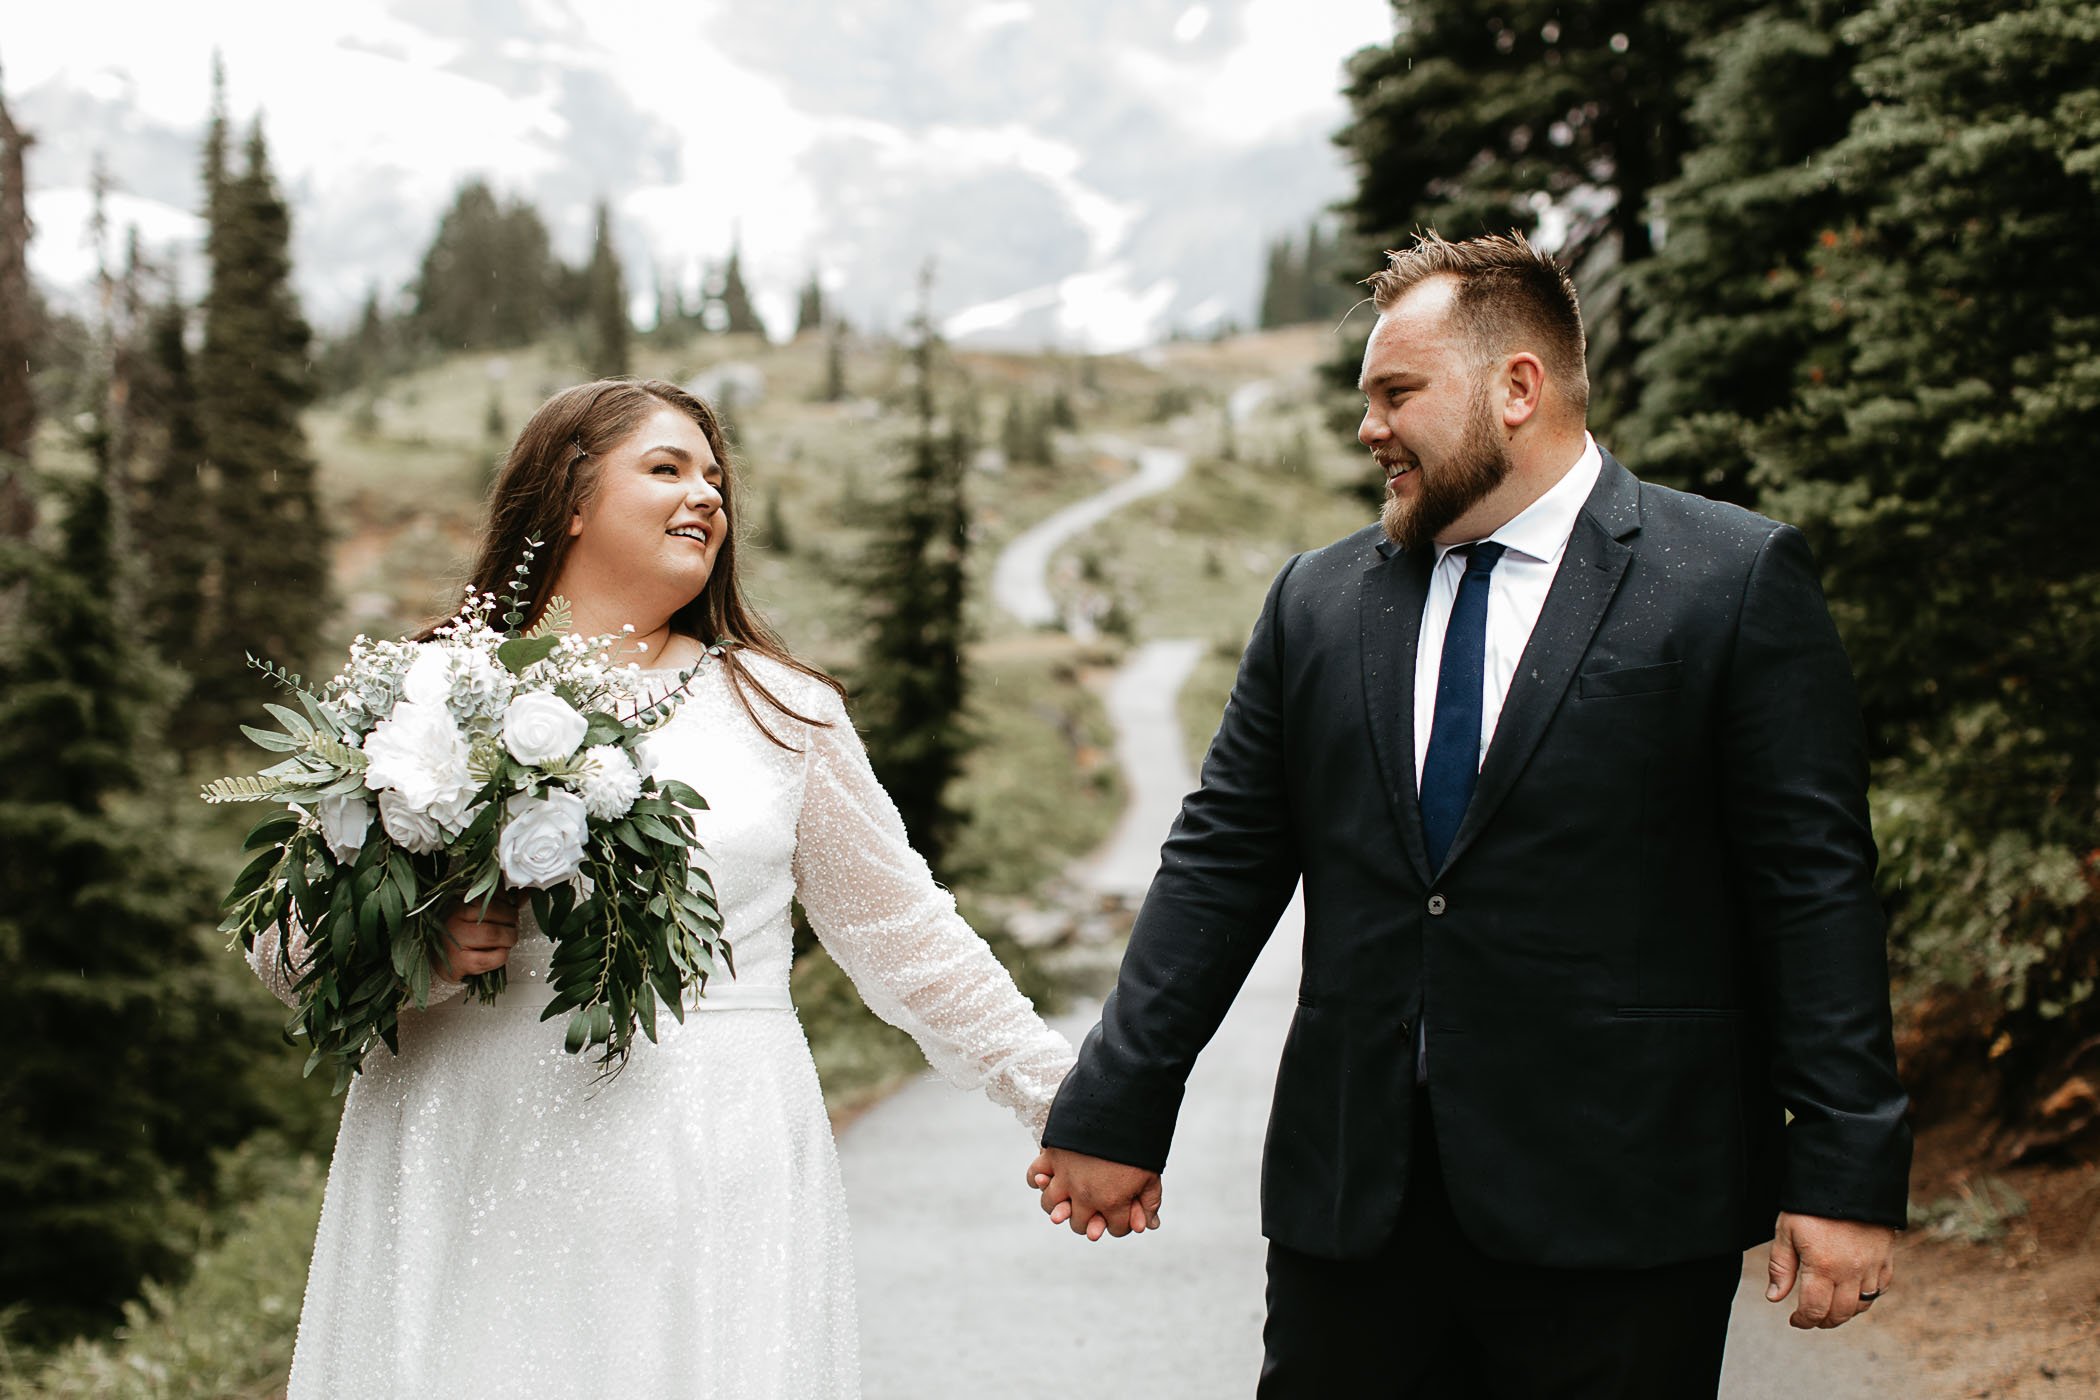  A couple in white wedding dress and suit hold hands looking at each other on a tree line path on a rainy day in Mt. Rainier National park 